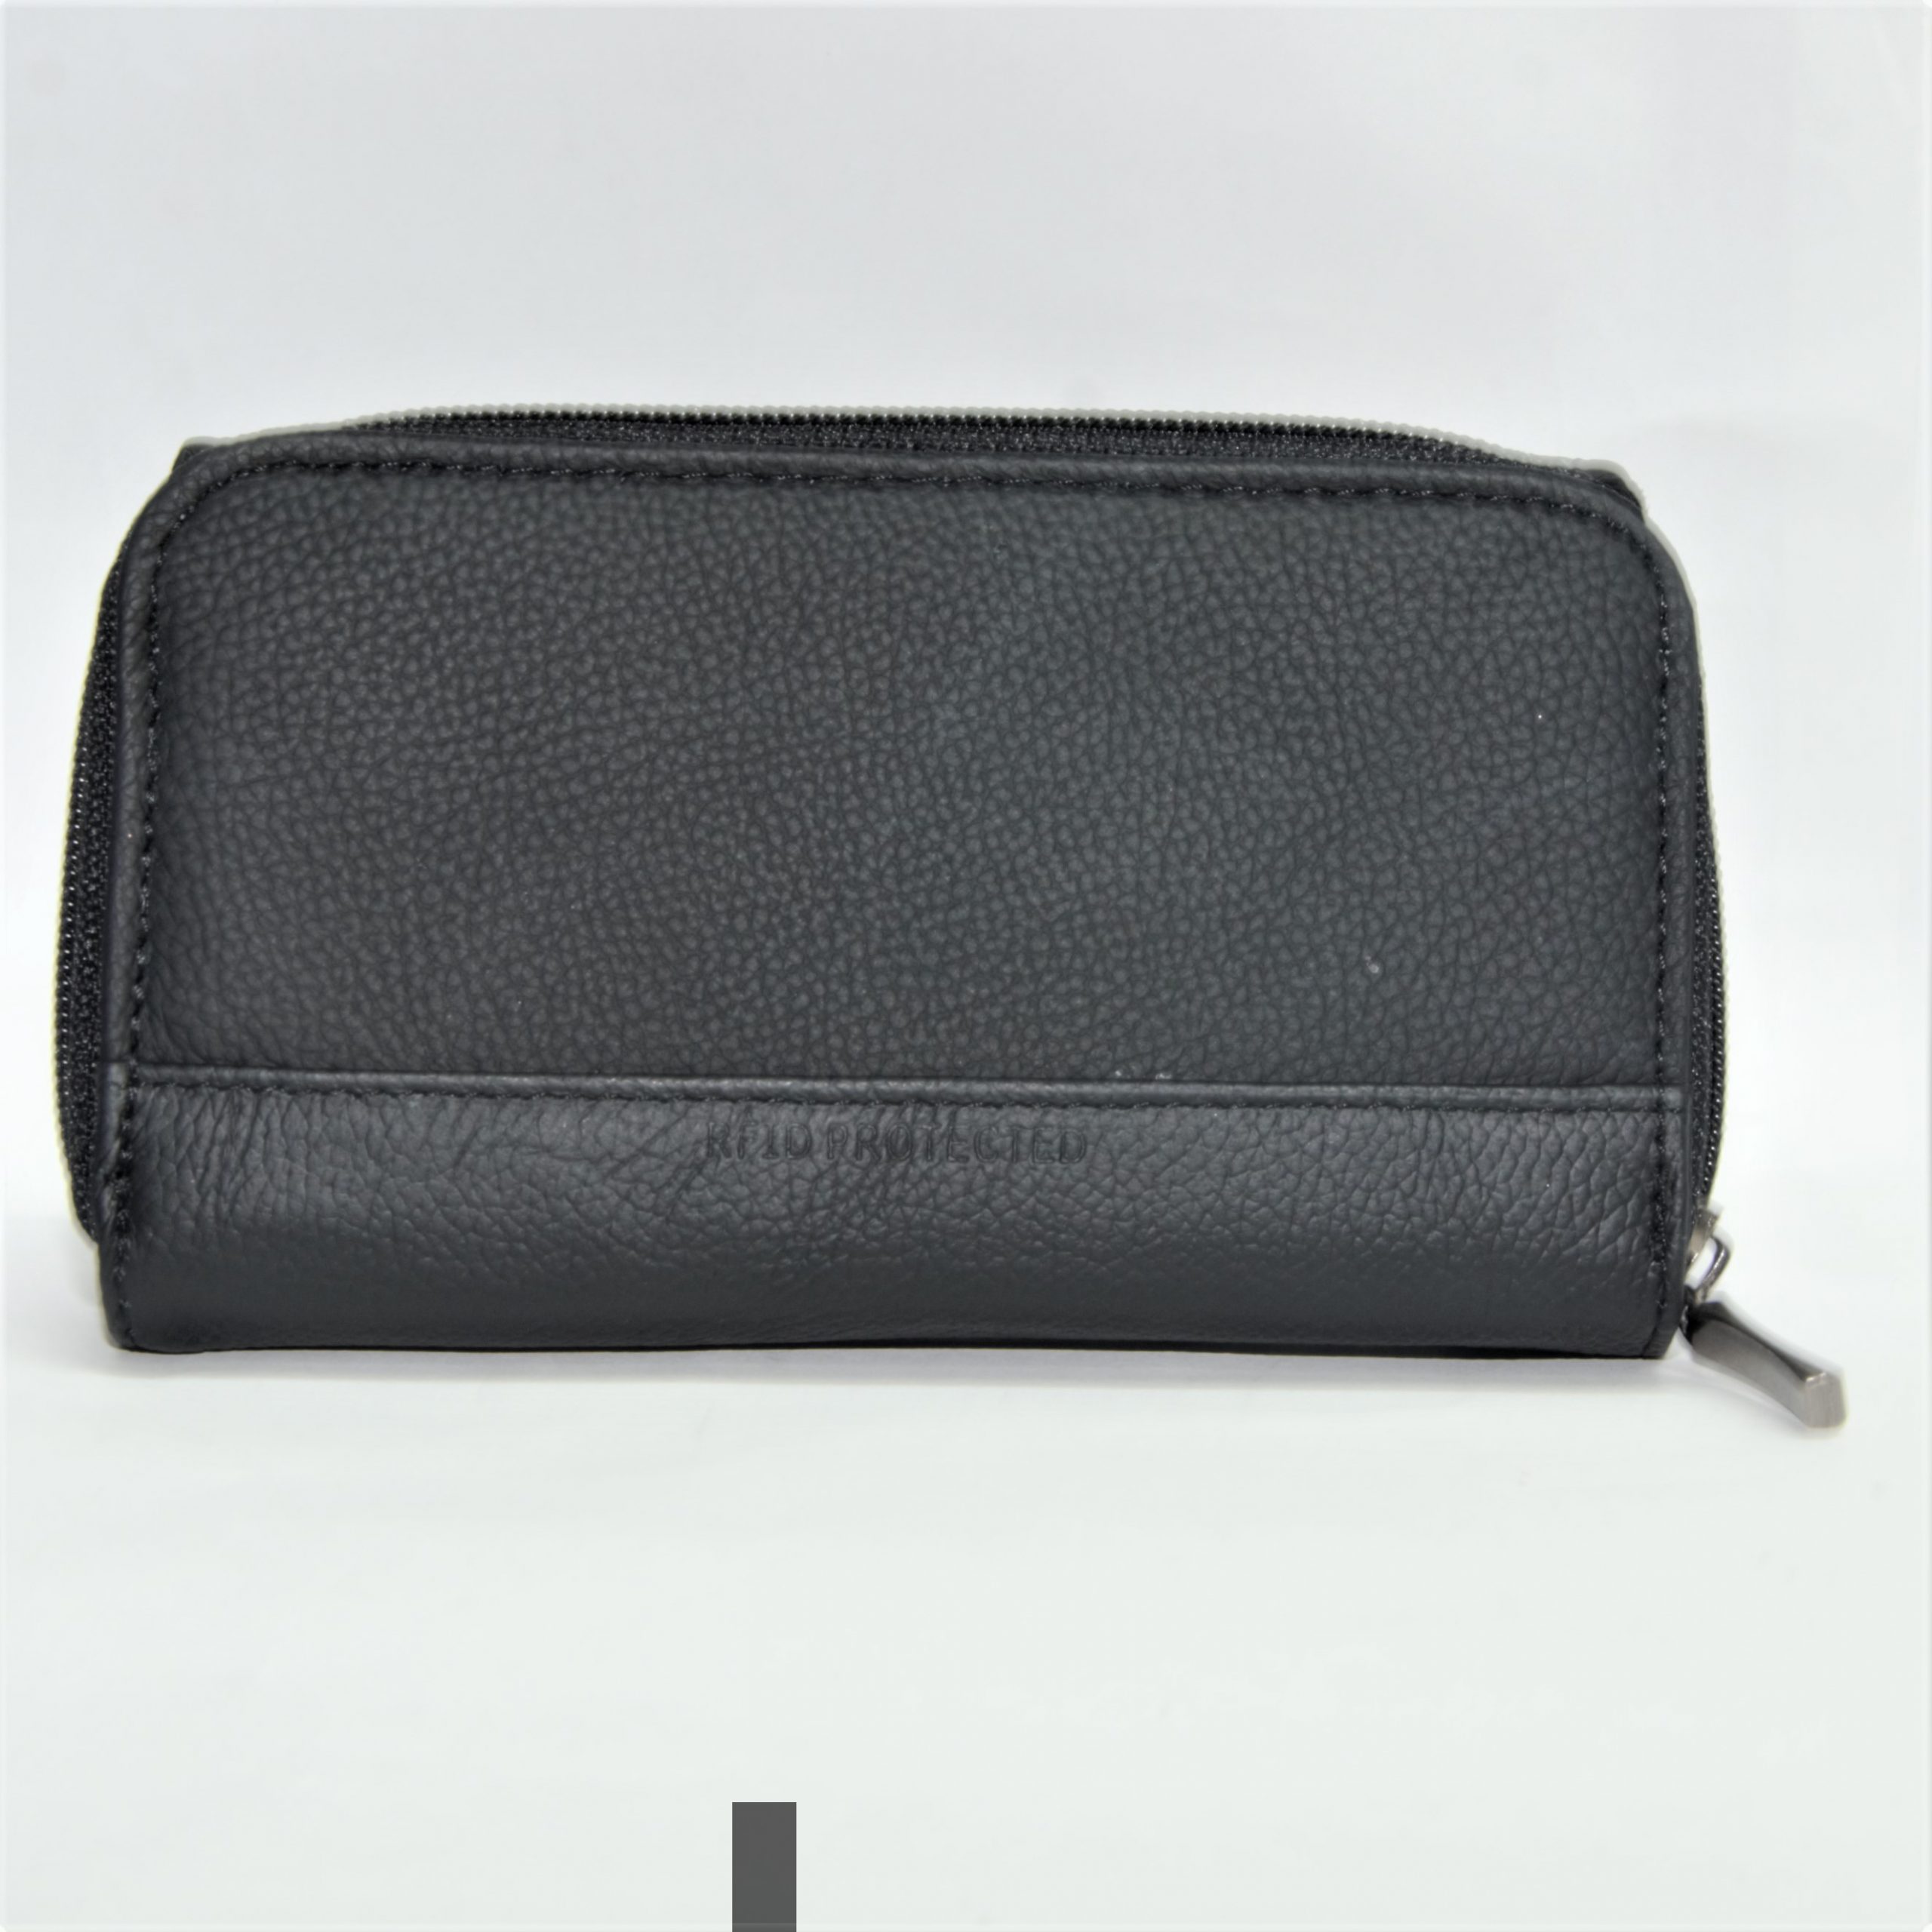 Lorenz Leather RFID Purse - Style No. 3711 - OJP Products